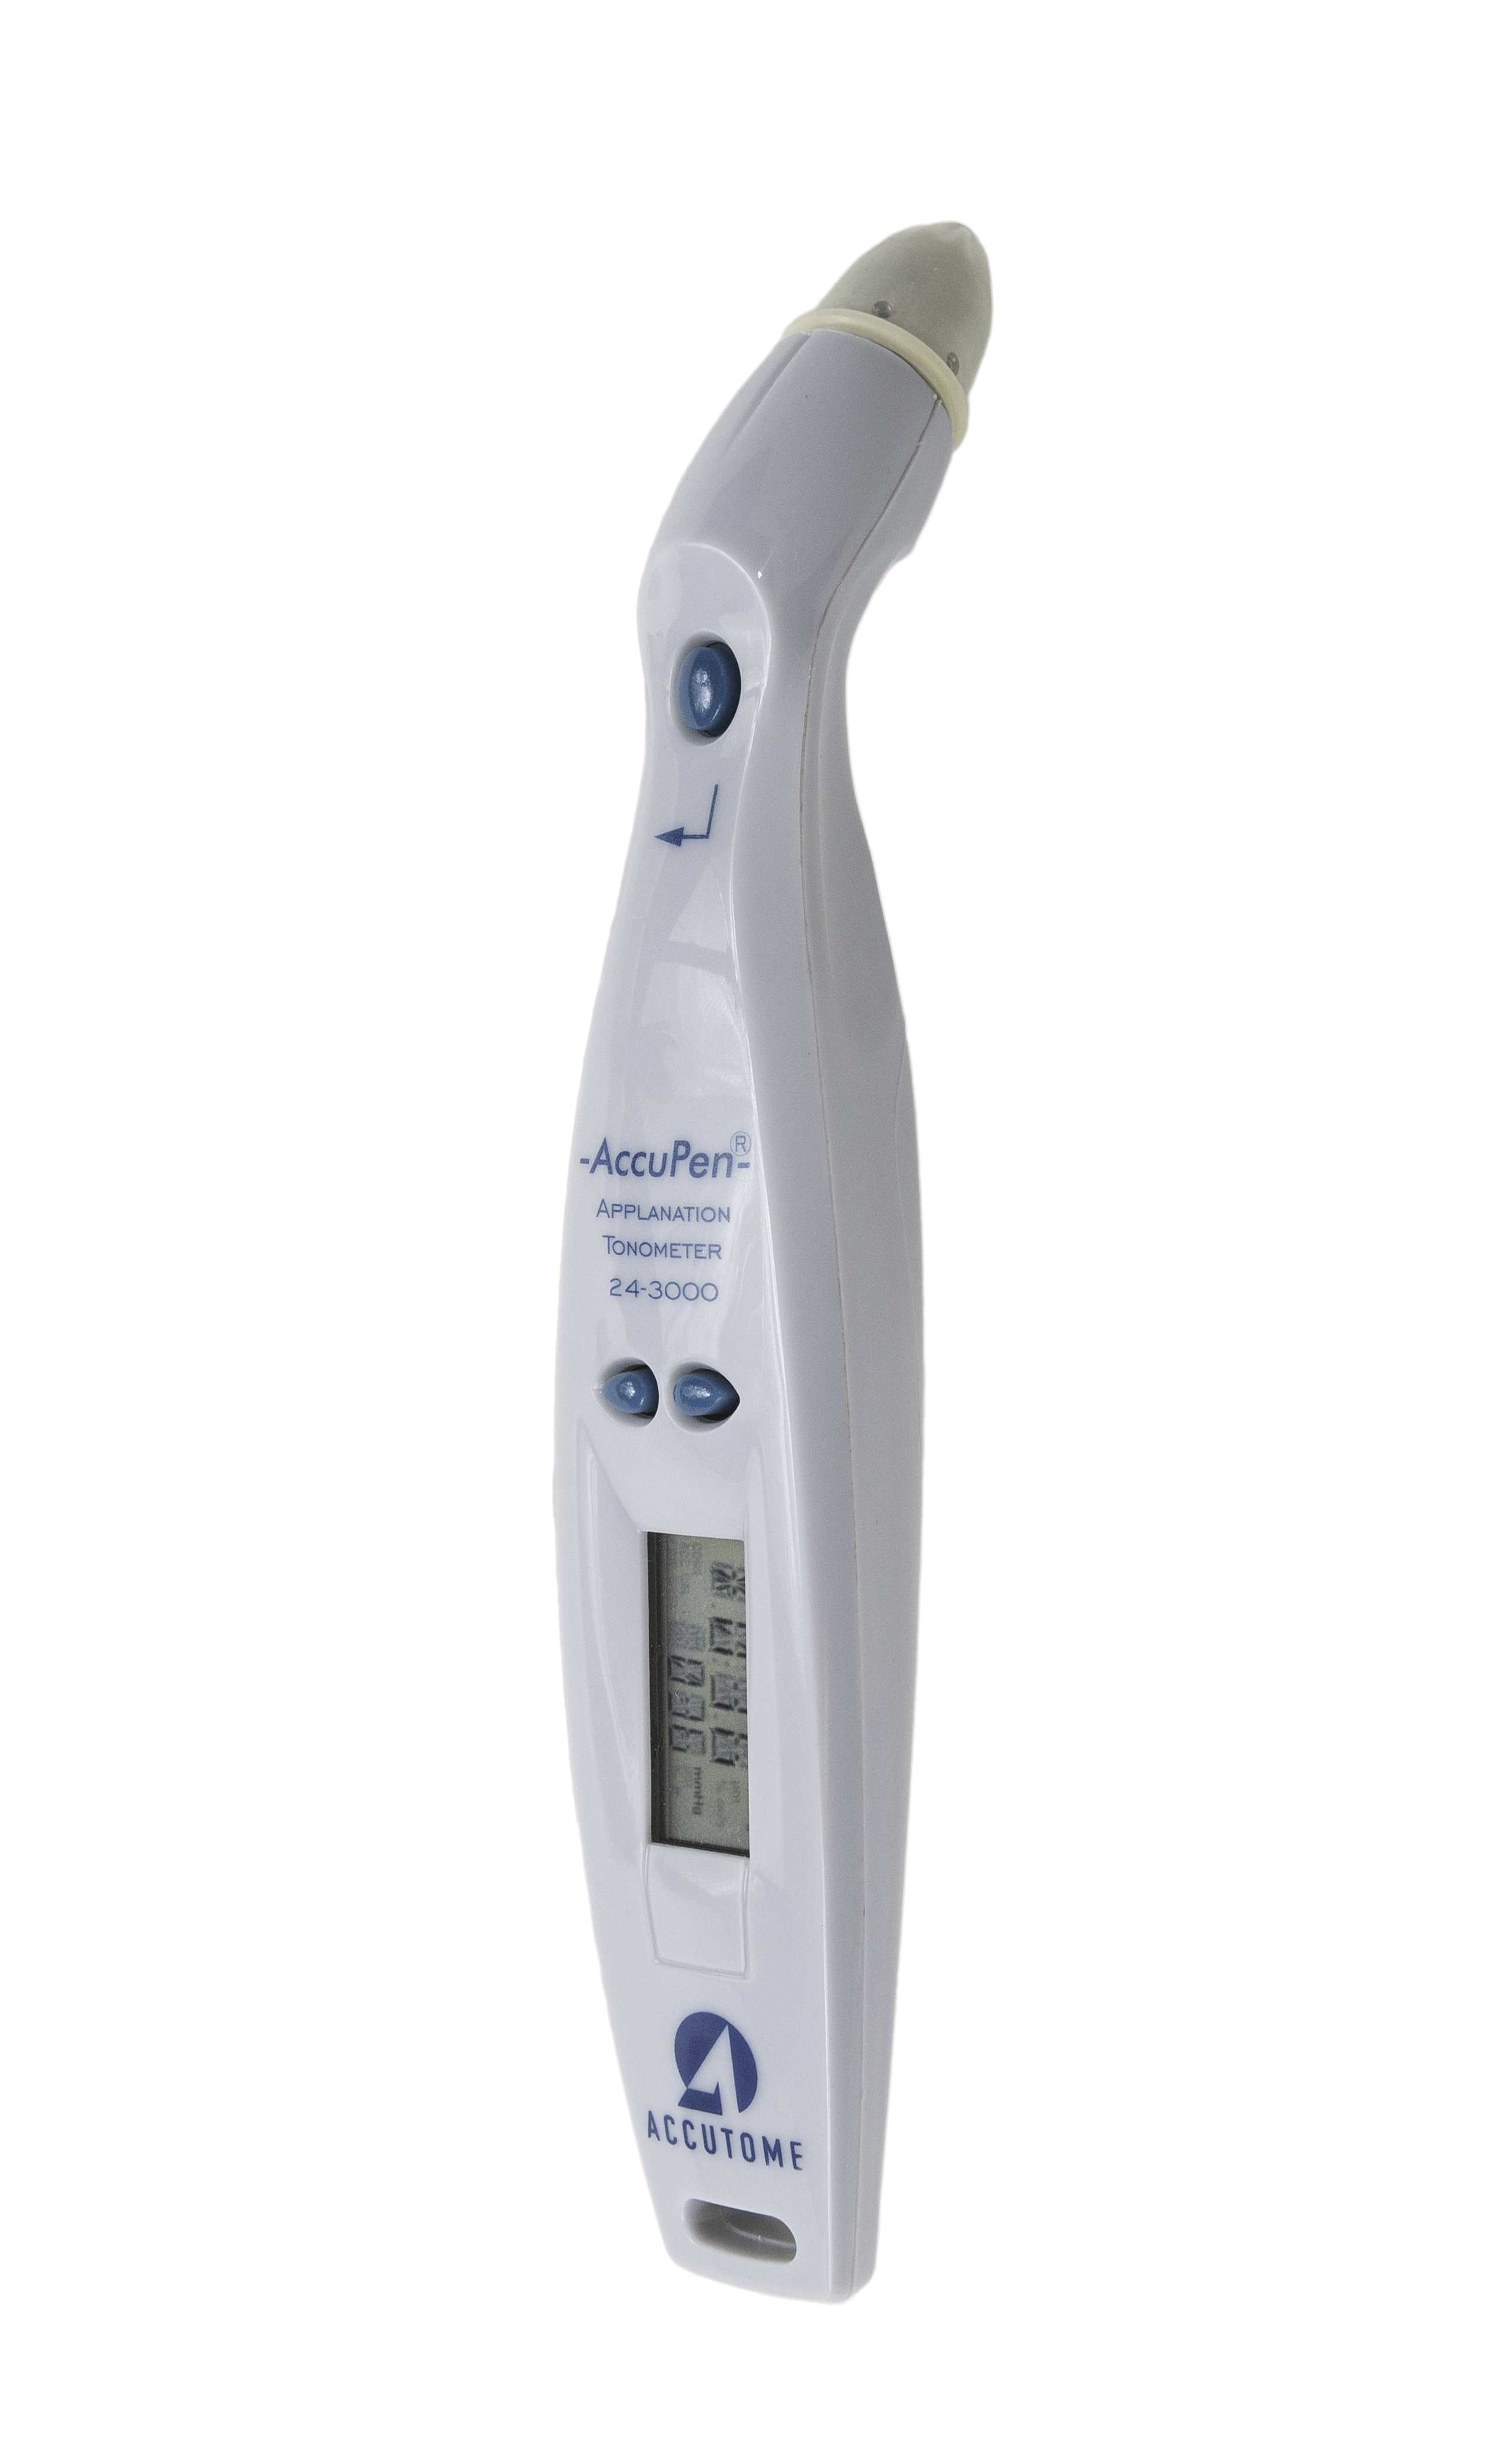 Hand-Held Applanation Tonometer (AccuPen)